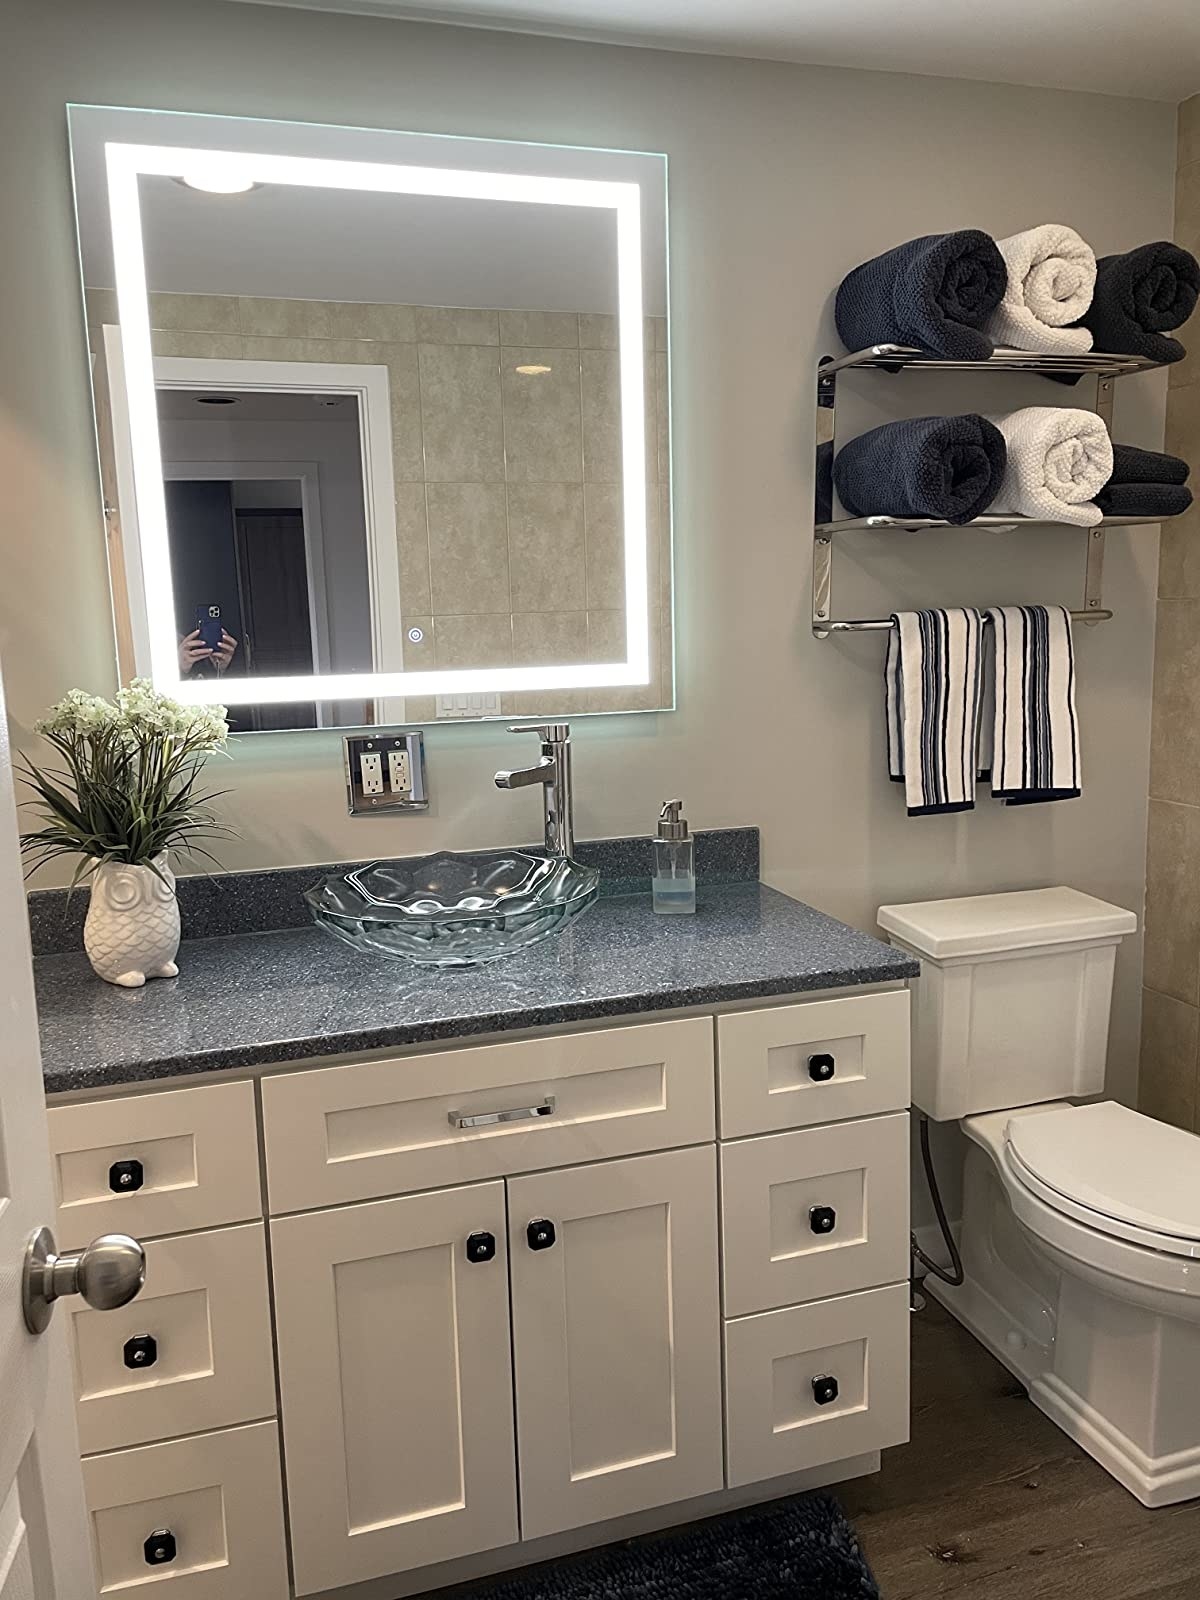 Reviewer photo of the mirror installed in their bathroom and lit up, showcasing the LED lights surrounding the frame